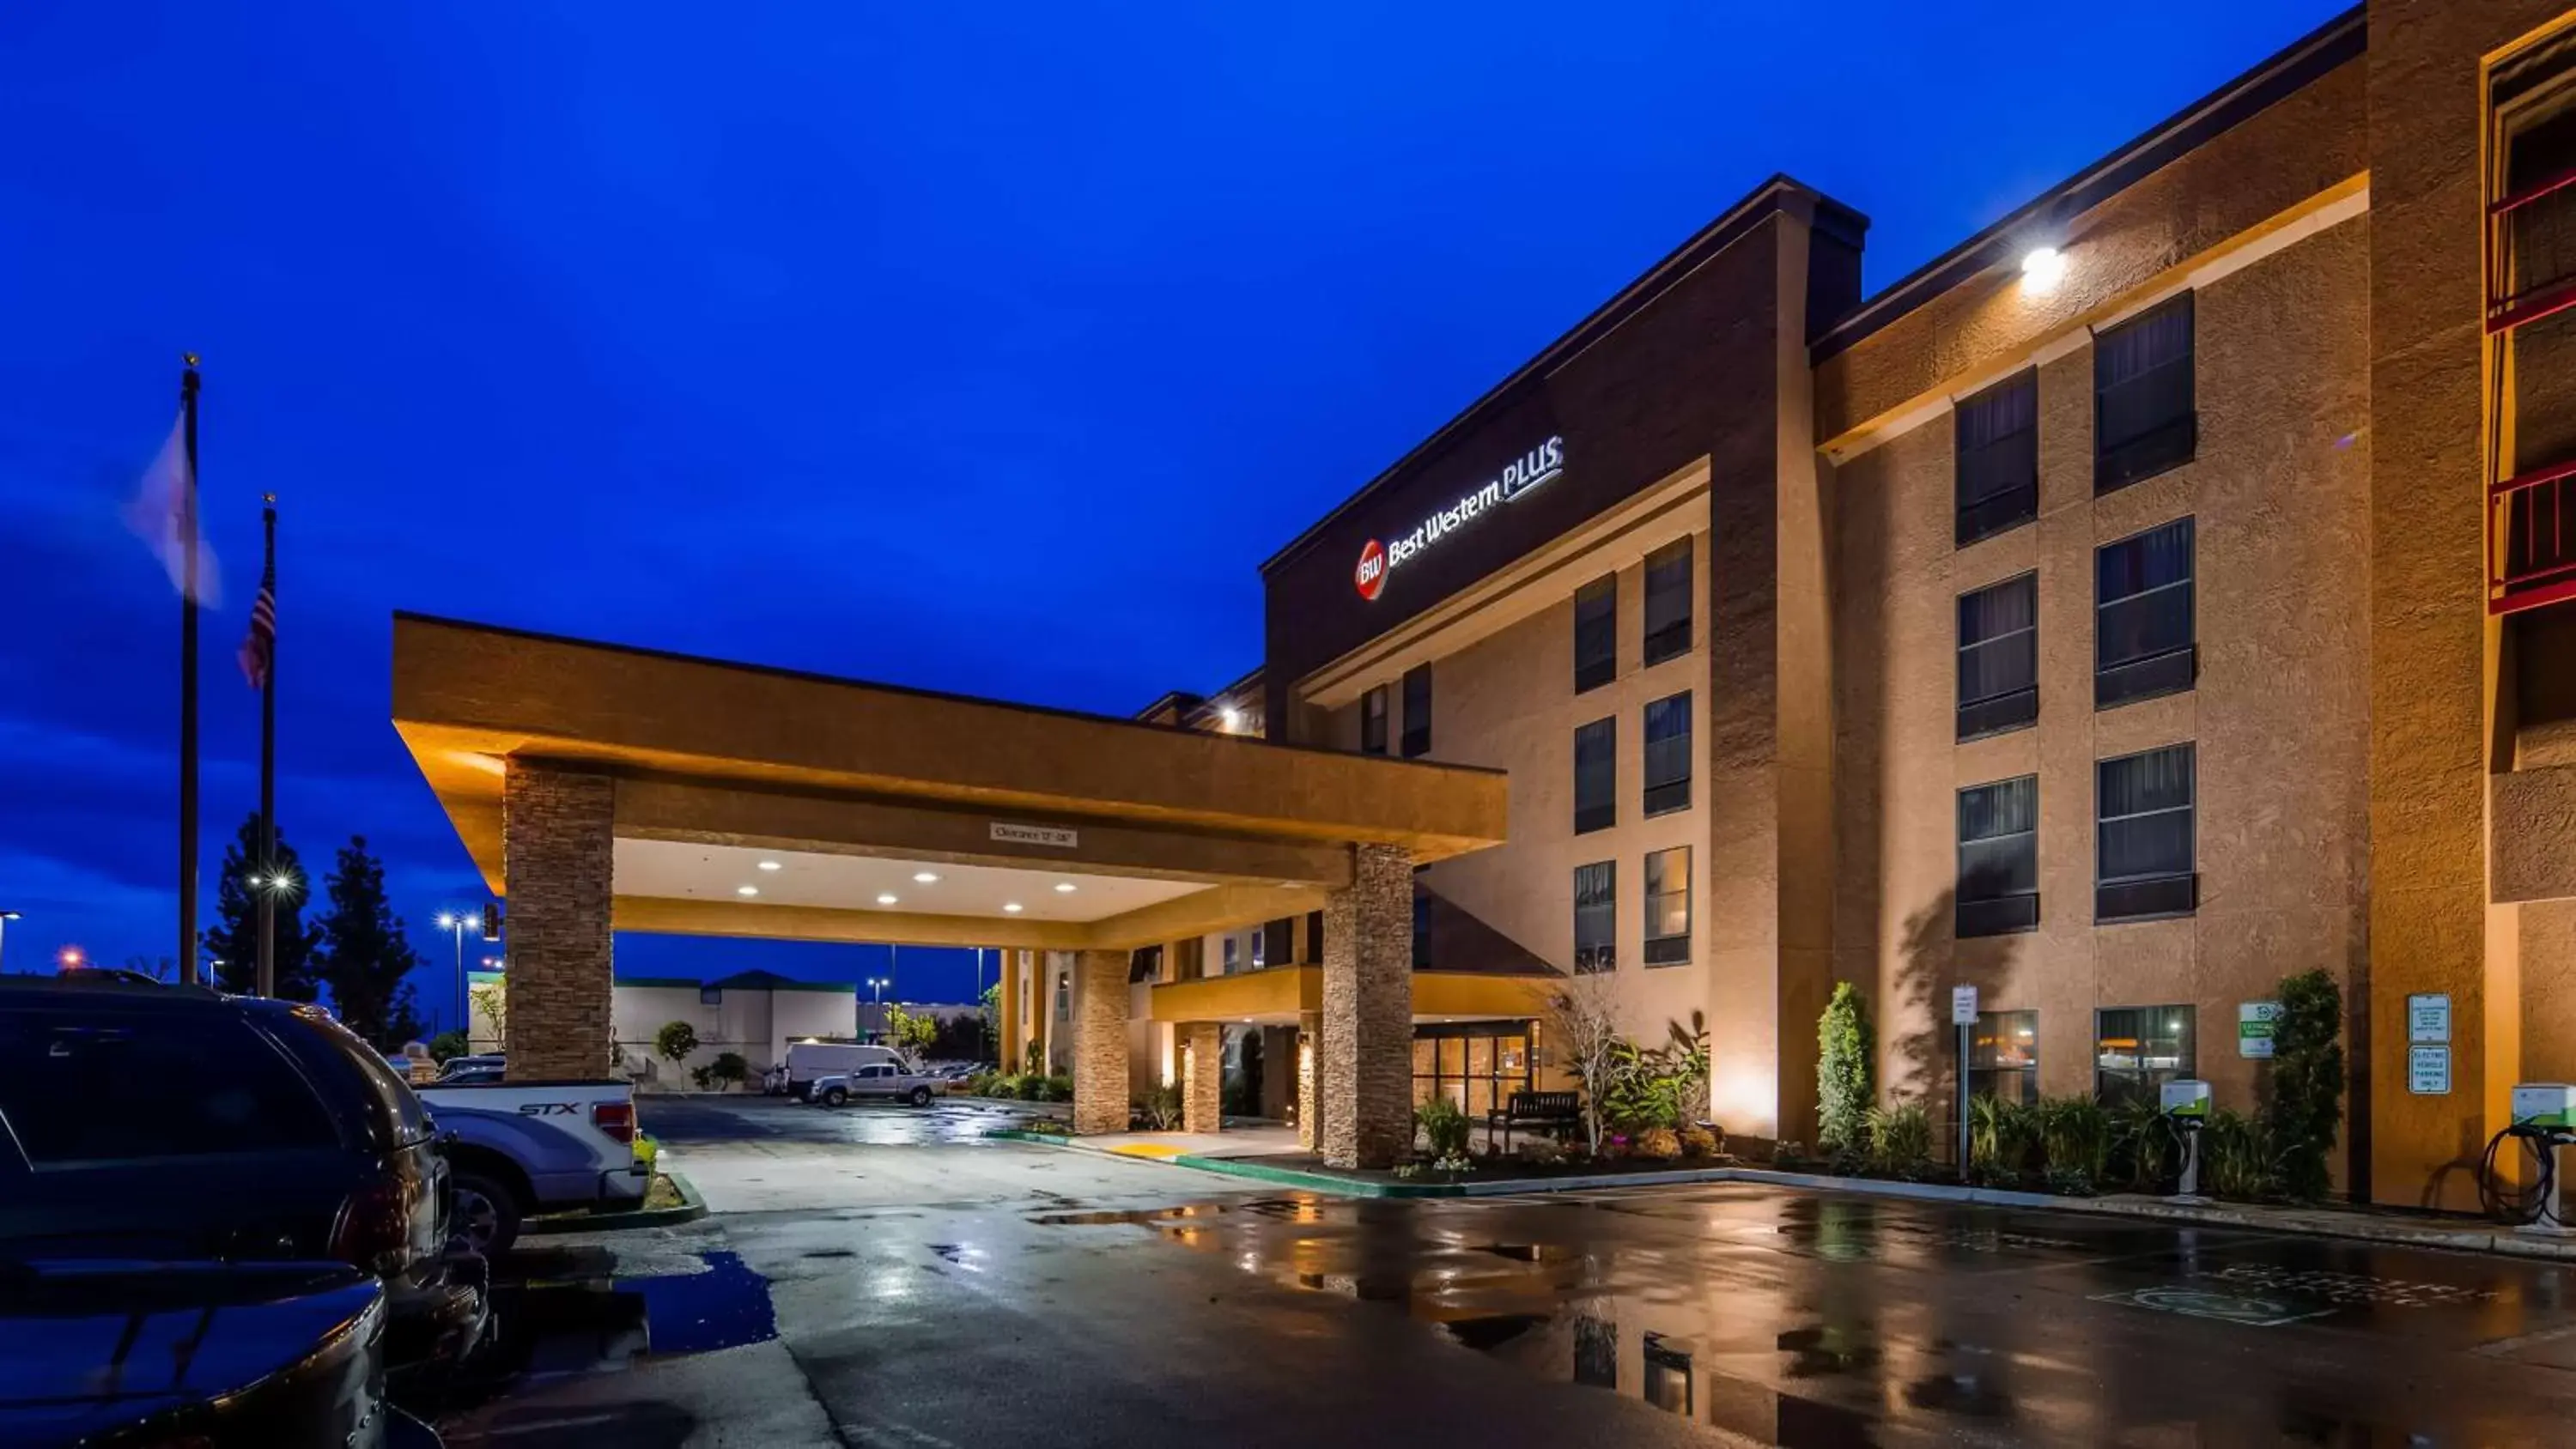 Property Building in Best Western Plus Fresno Airport Hotel